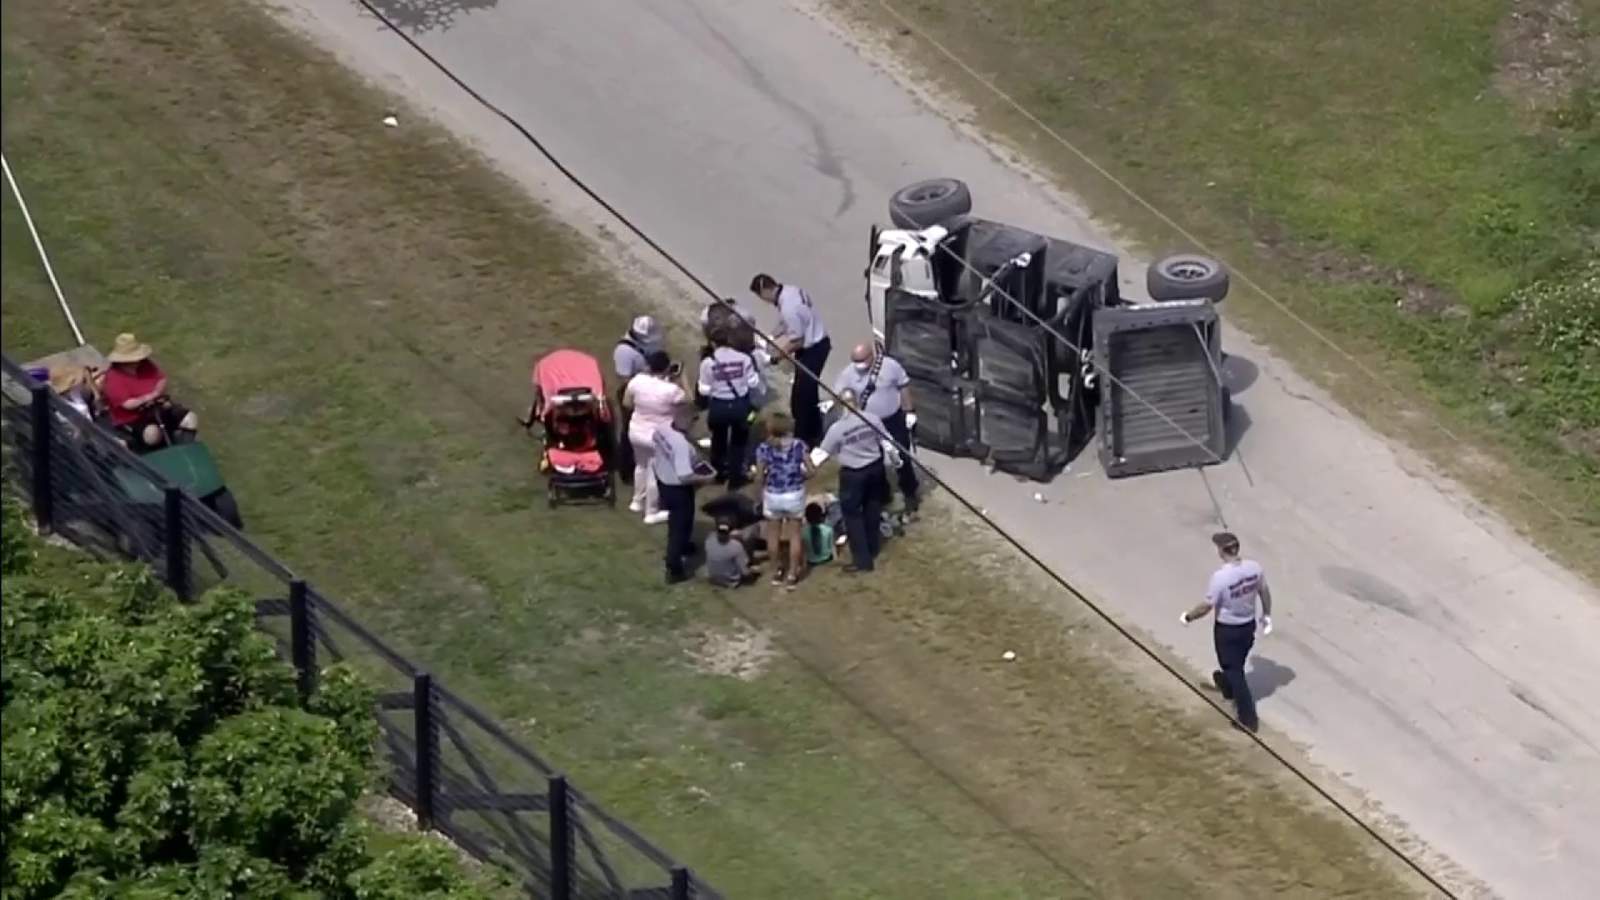 4 minors injured after off-road utility vehicle overturns in rural southwest Miami-Dade